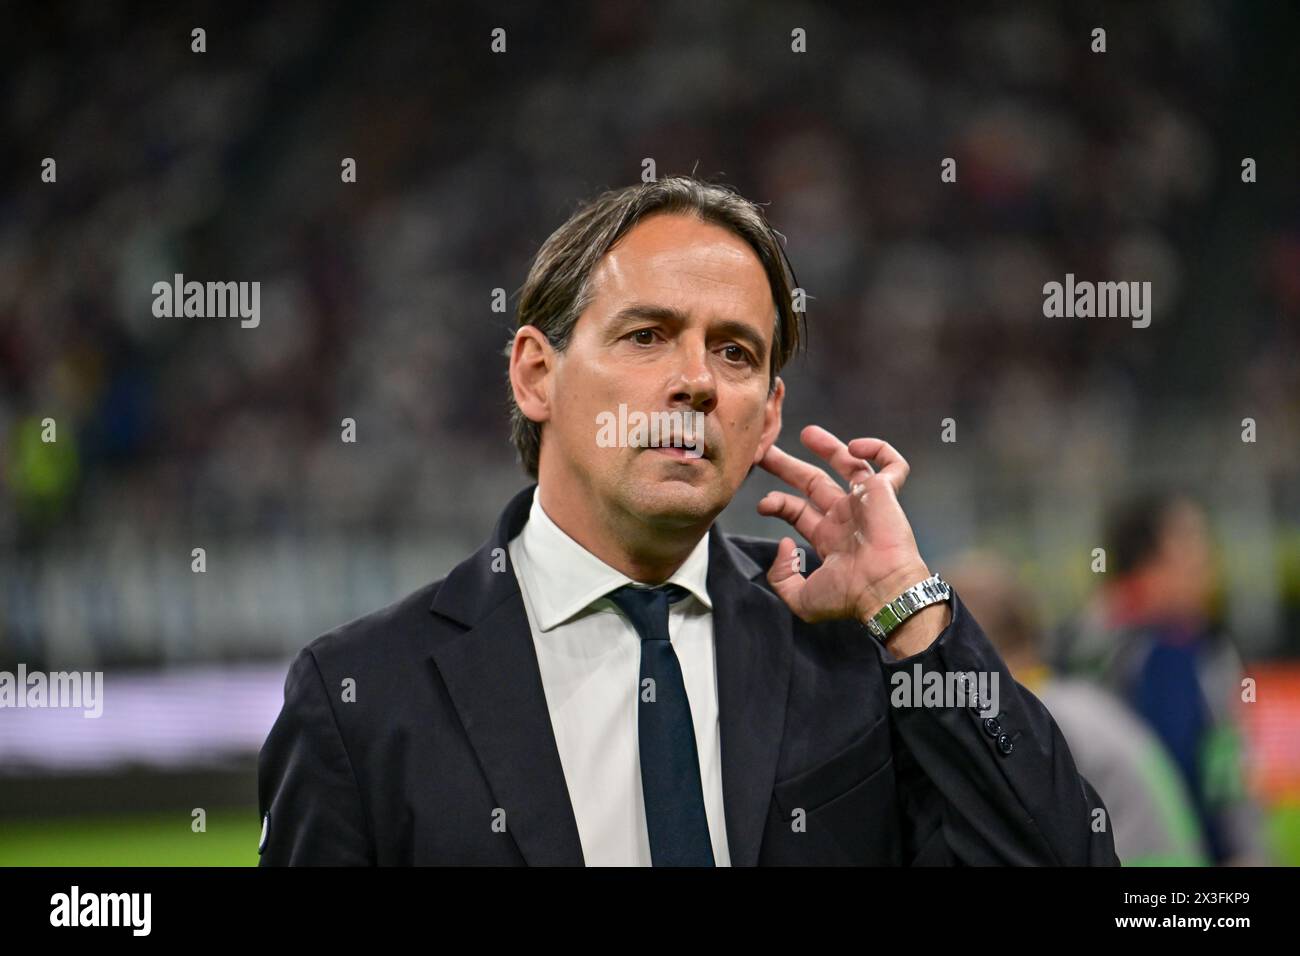 Milano, Italy. 14th, April 2024. Head coach Simone Inzaghi of Inter seen during the Serie A match between Inter and Cagliari at Giuseppe Meazza in Milano. (Photo credit: Gonzales Photo - Tommaso Fimiano). Stock Photo